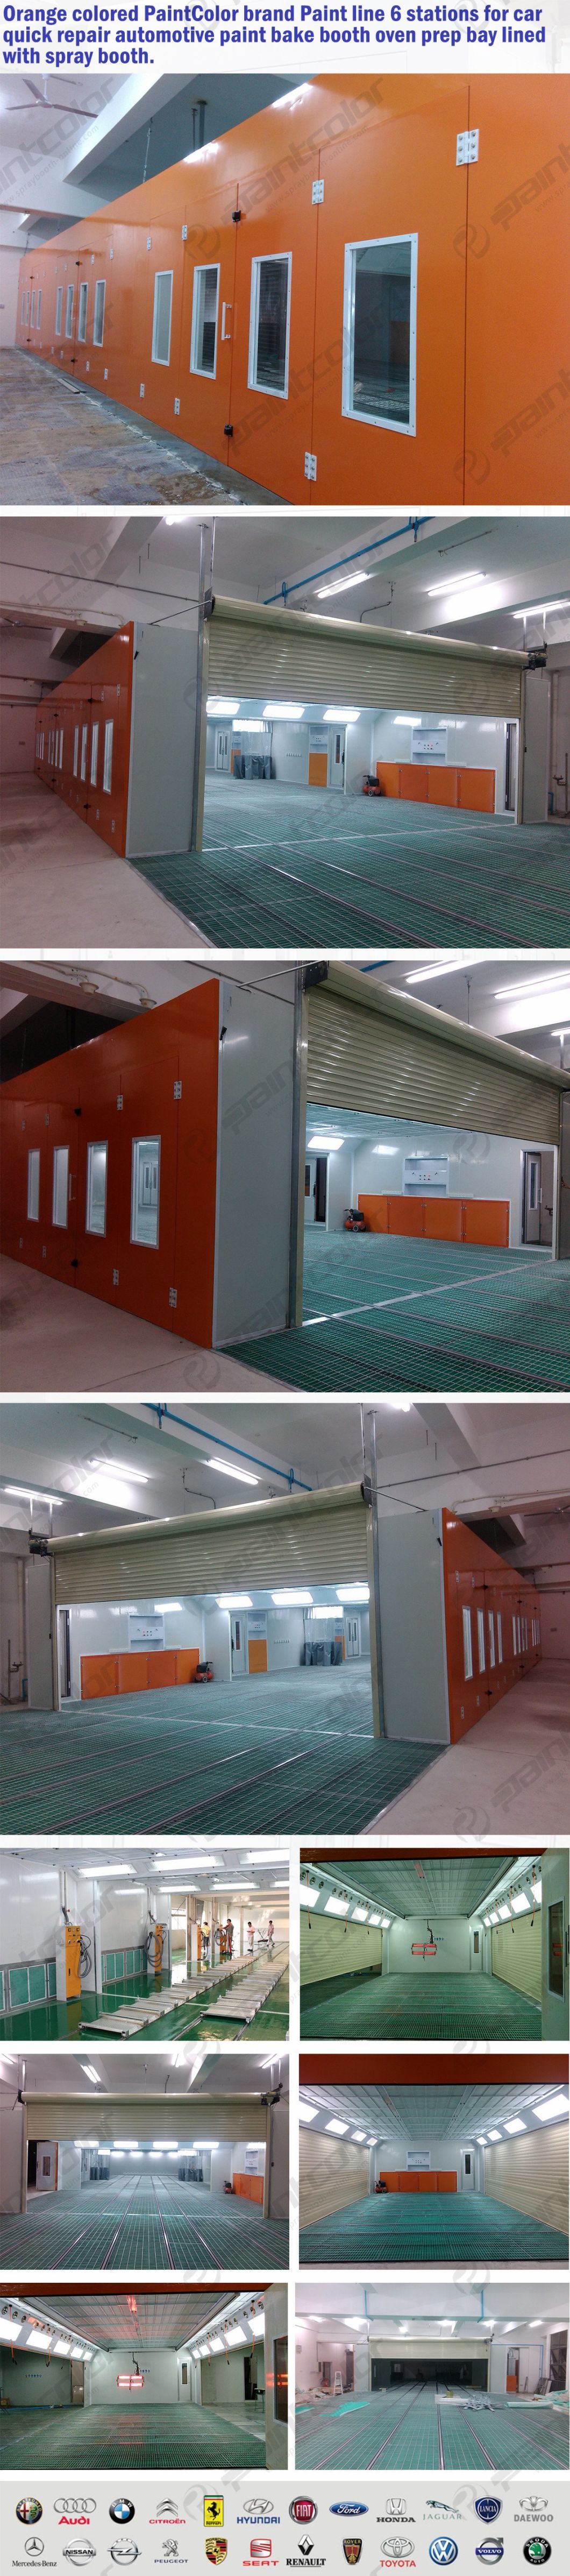 Spray Booth with Infrared Lamp Automotive Paint Booth in Line with Preparation Bay Prep Station Multi Work Station for Car Paint Repair